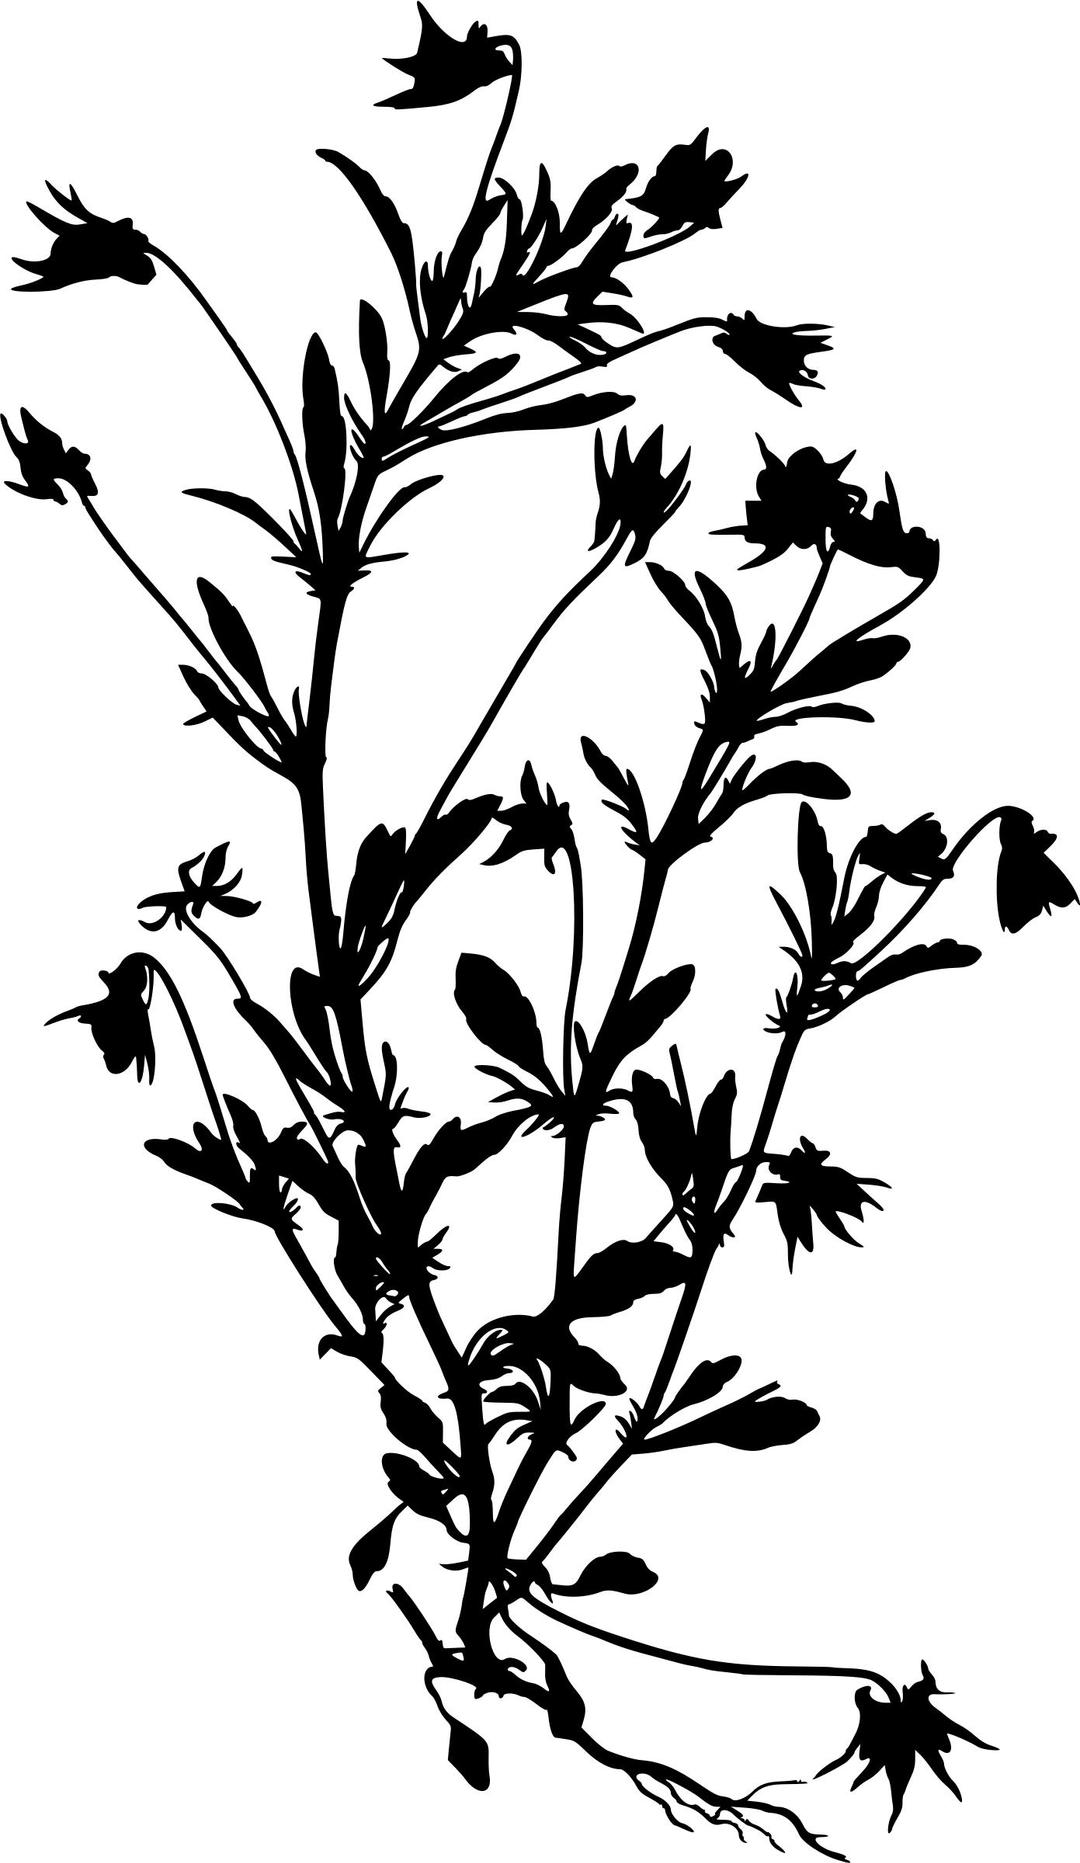 Heartsease 2 (silhouette) png transparent